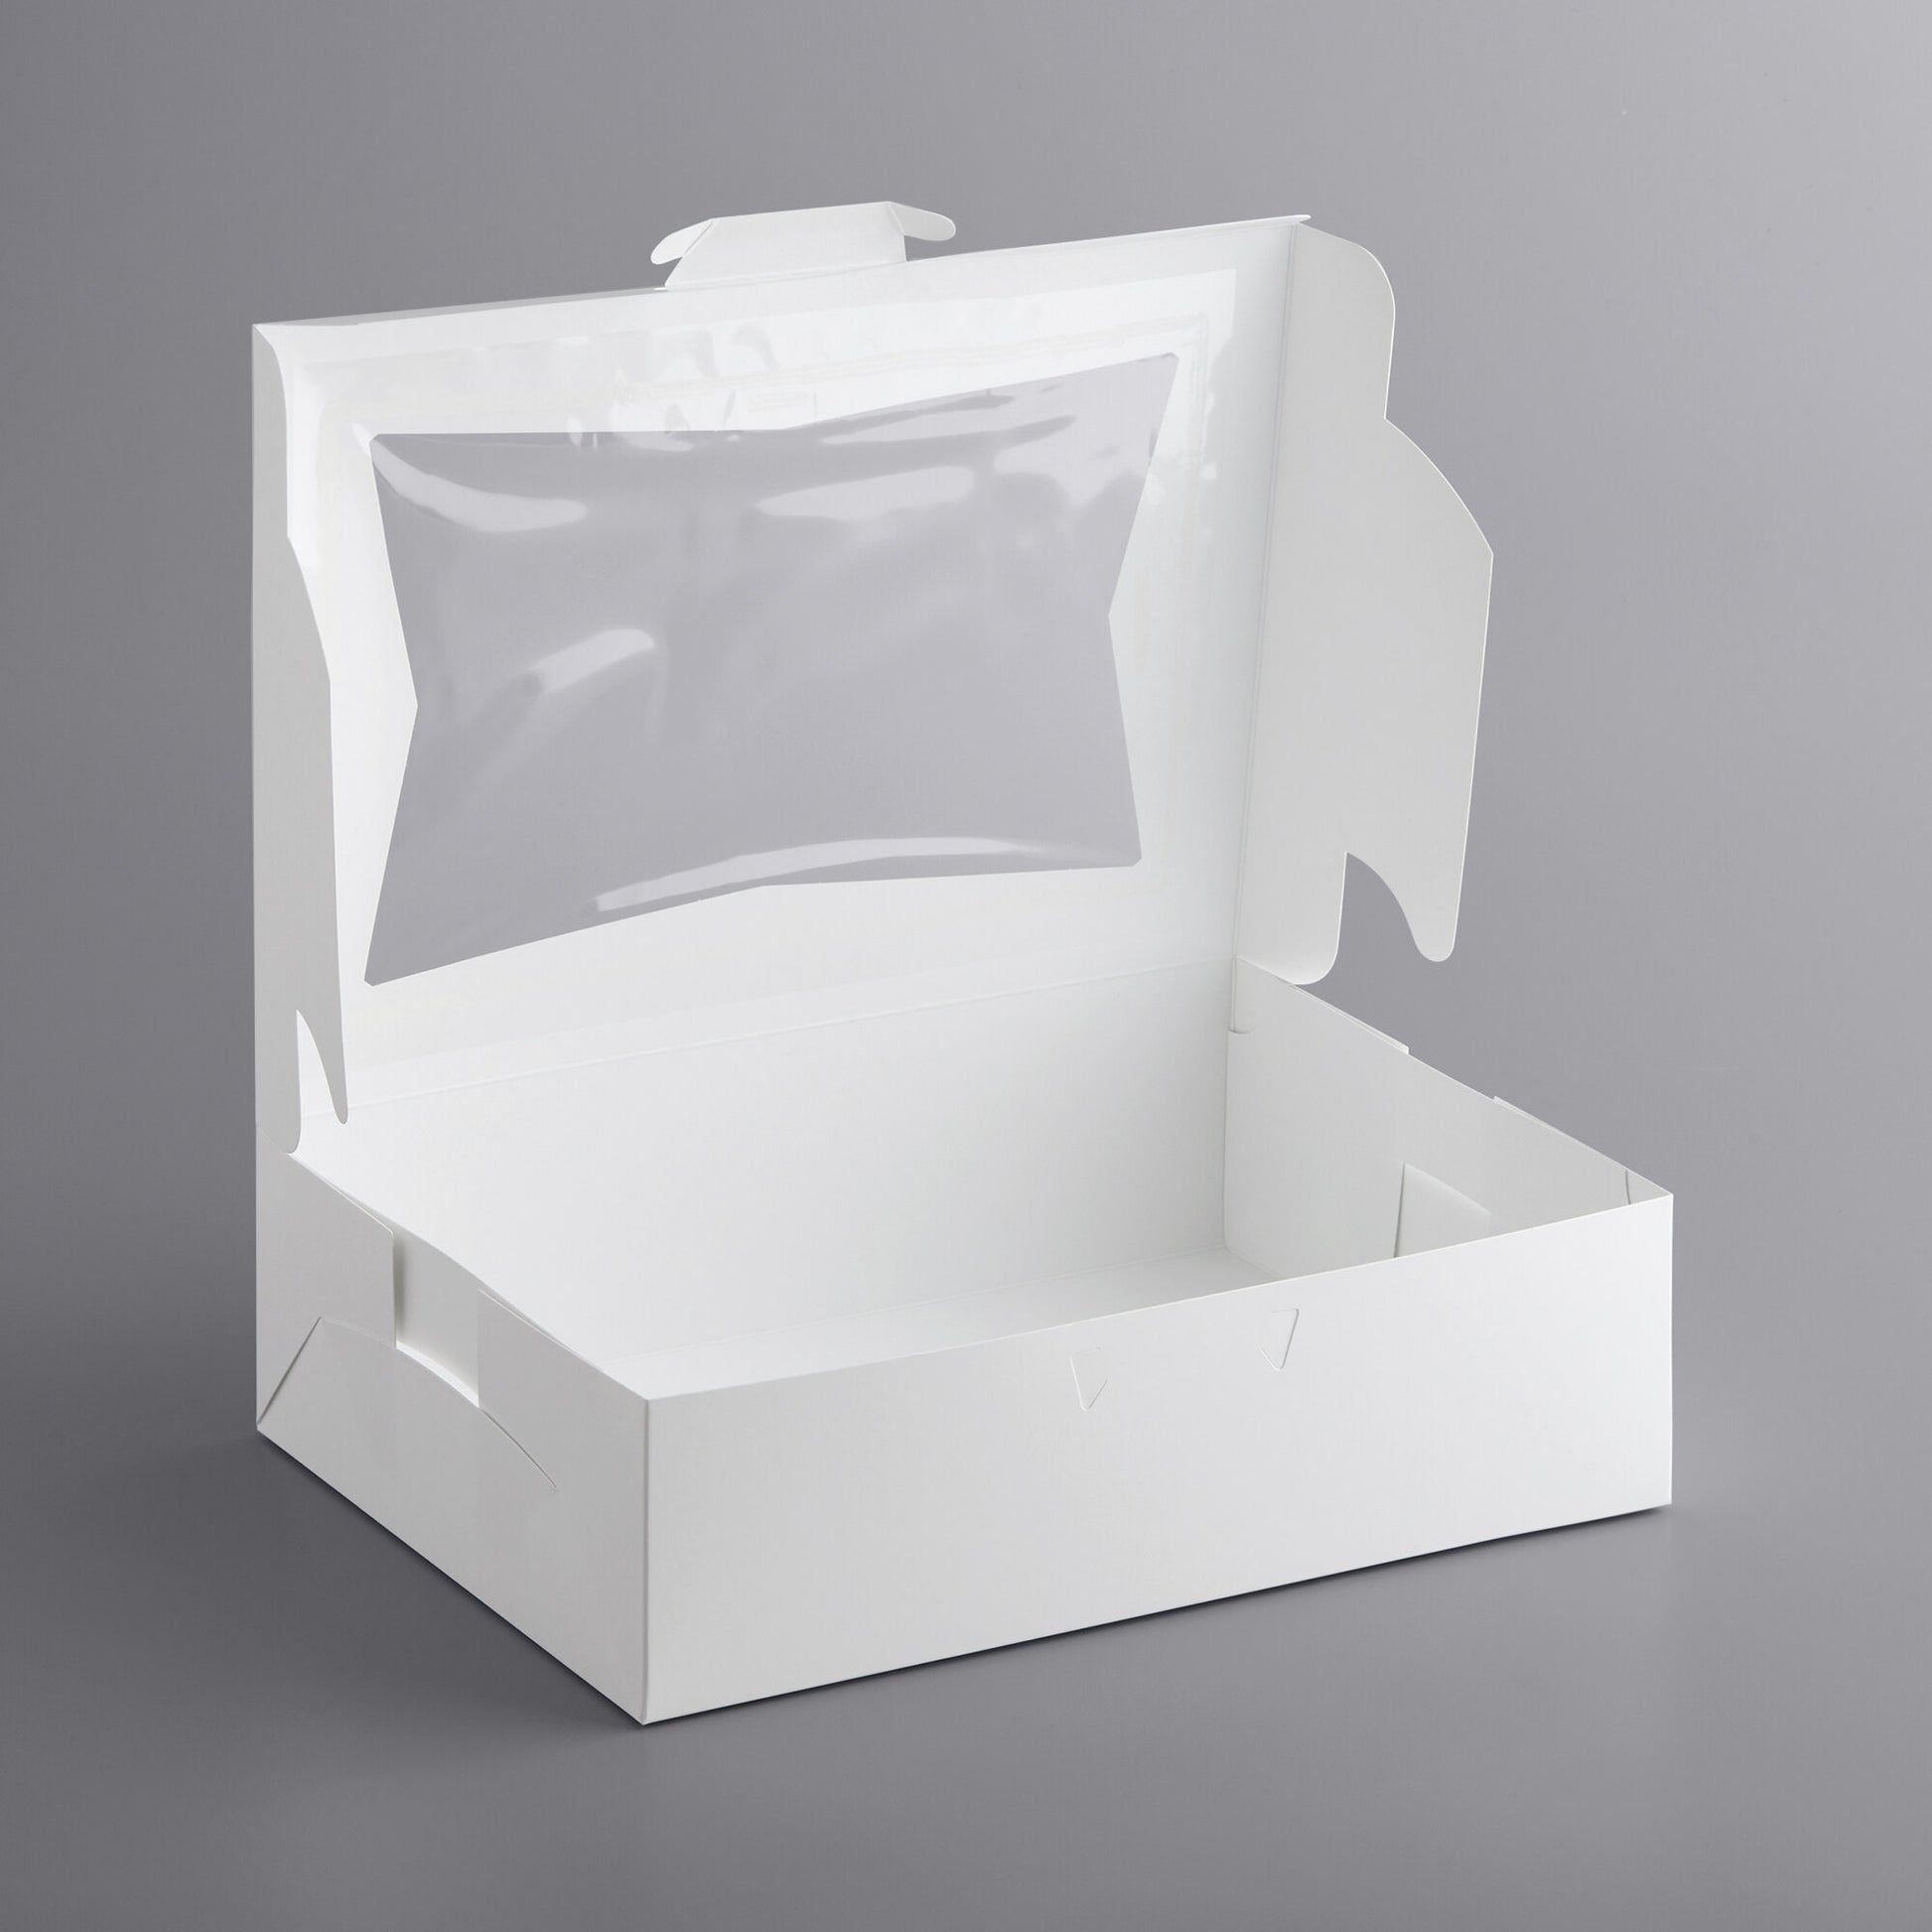 image of quarter sheet cake box with a window. The image shows the cake box assembled with the lid raised up